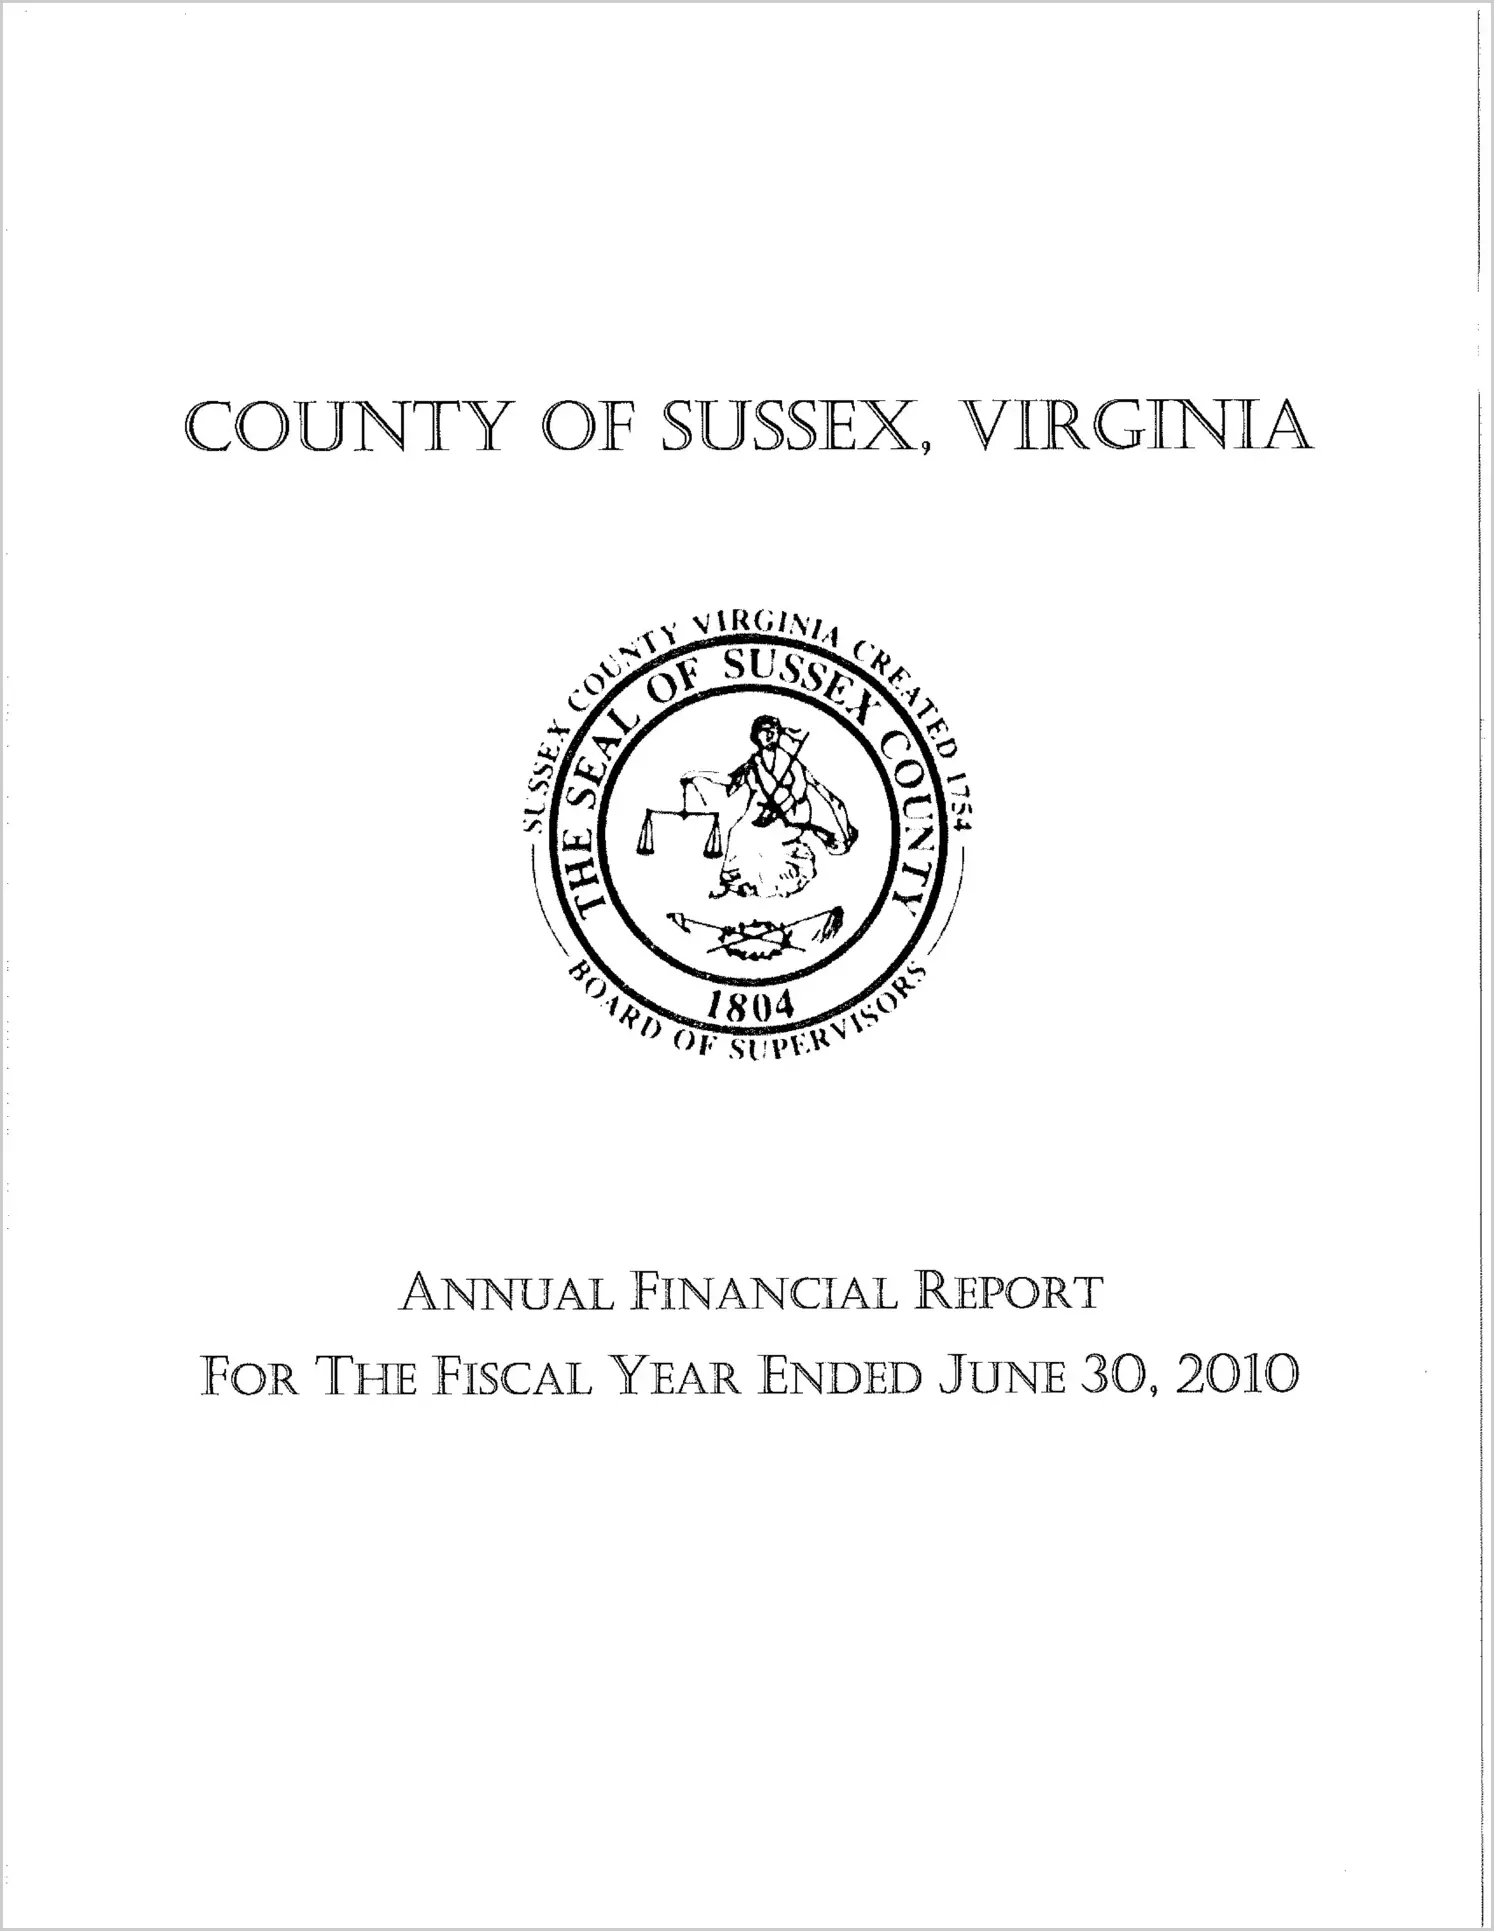 2010 Annual Financial Report for County of Sussex